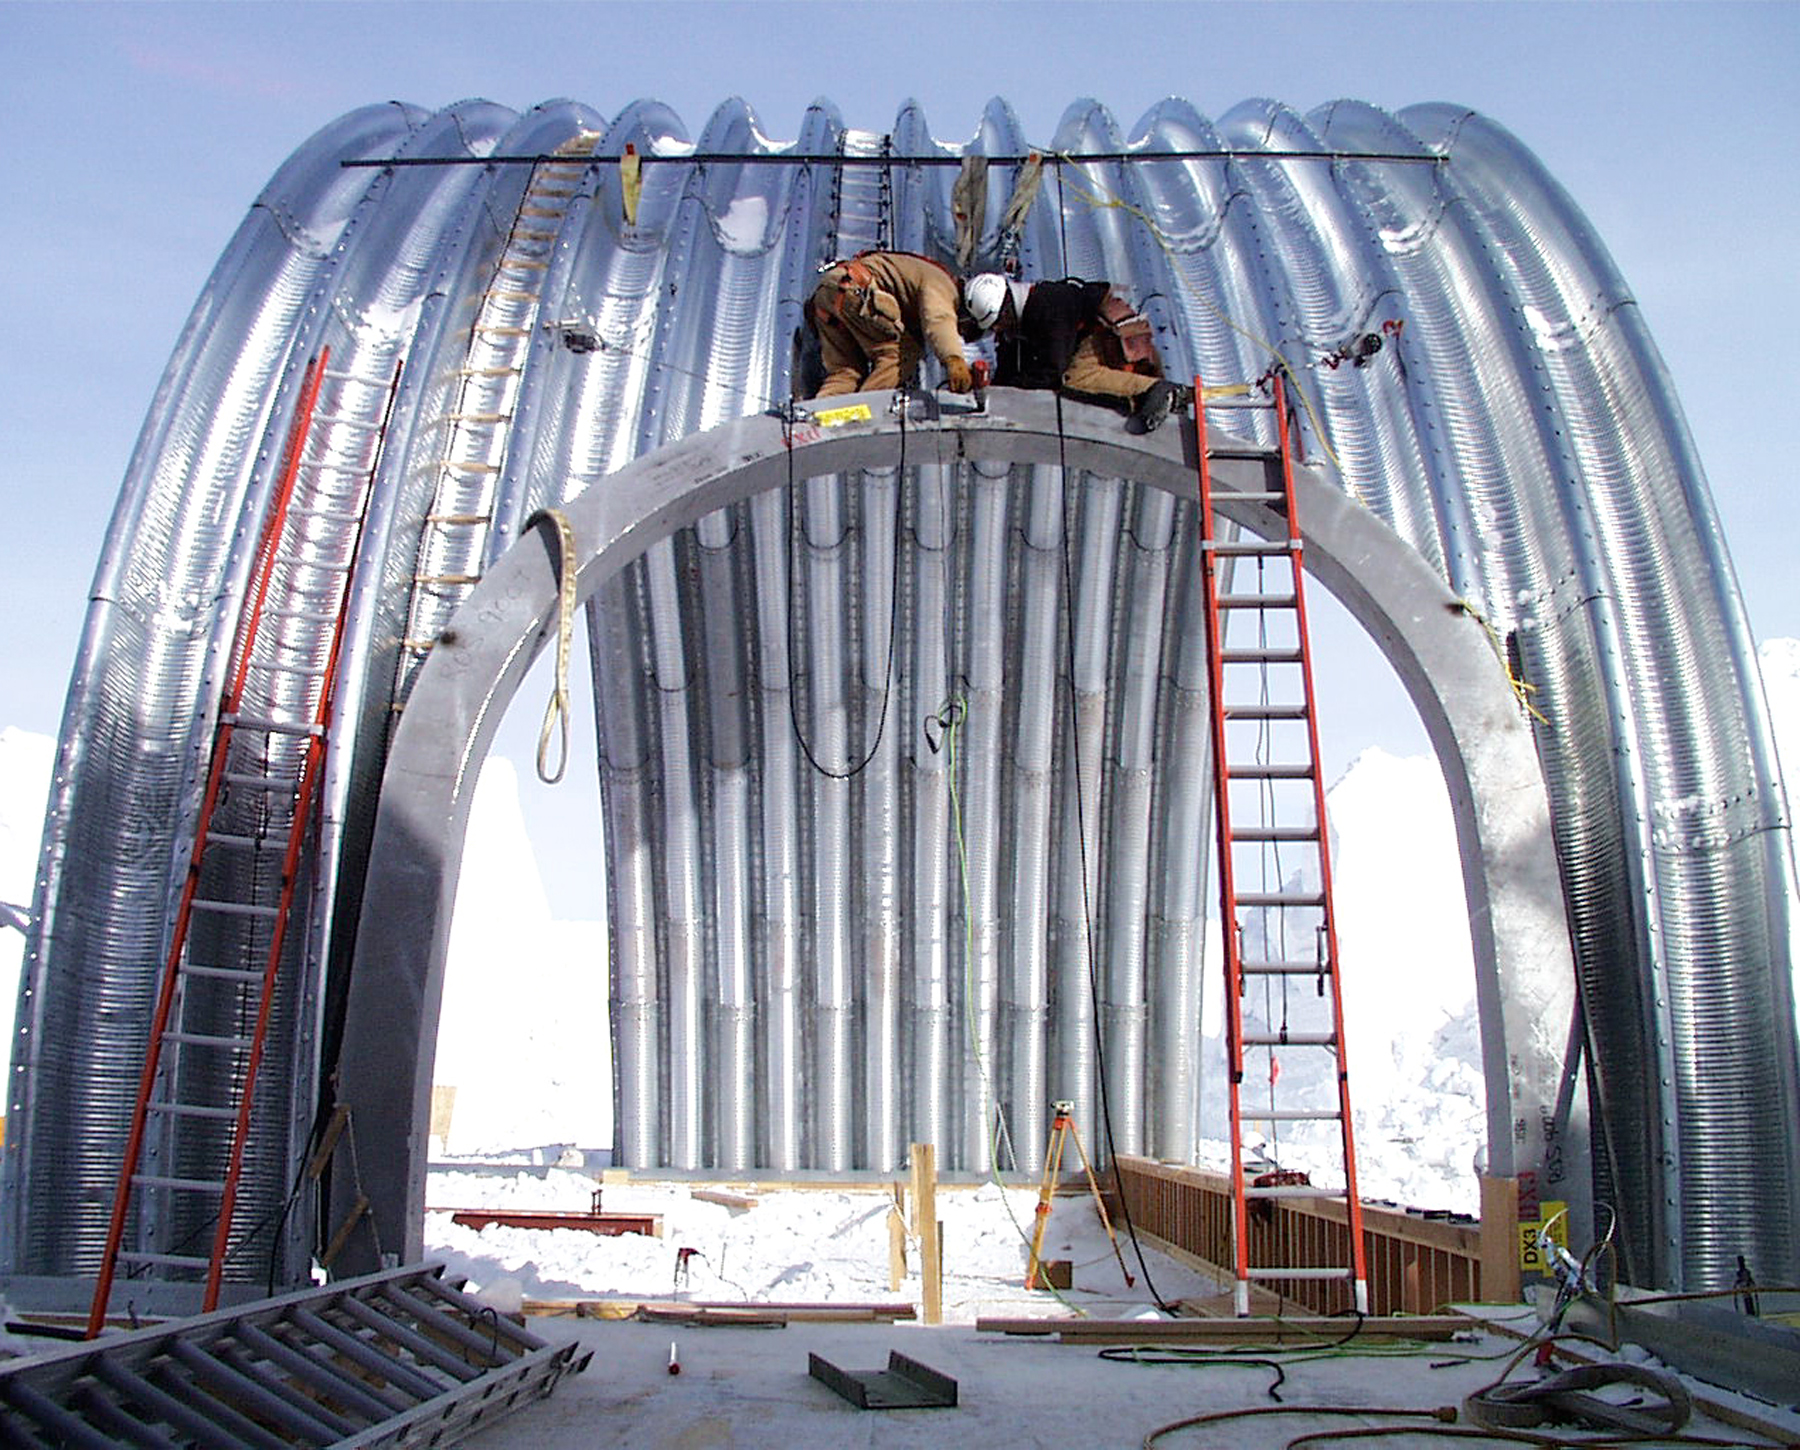 Construction workers work on a corrugated arch.